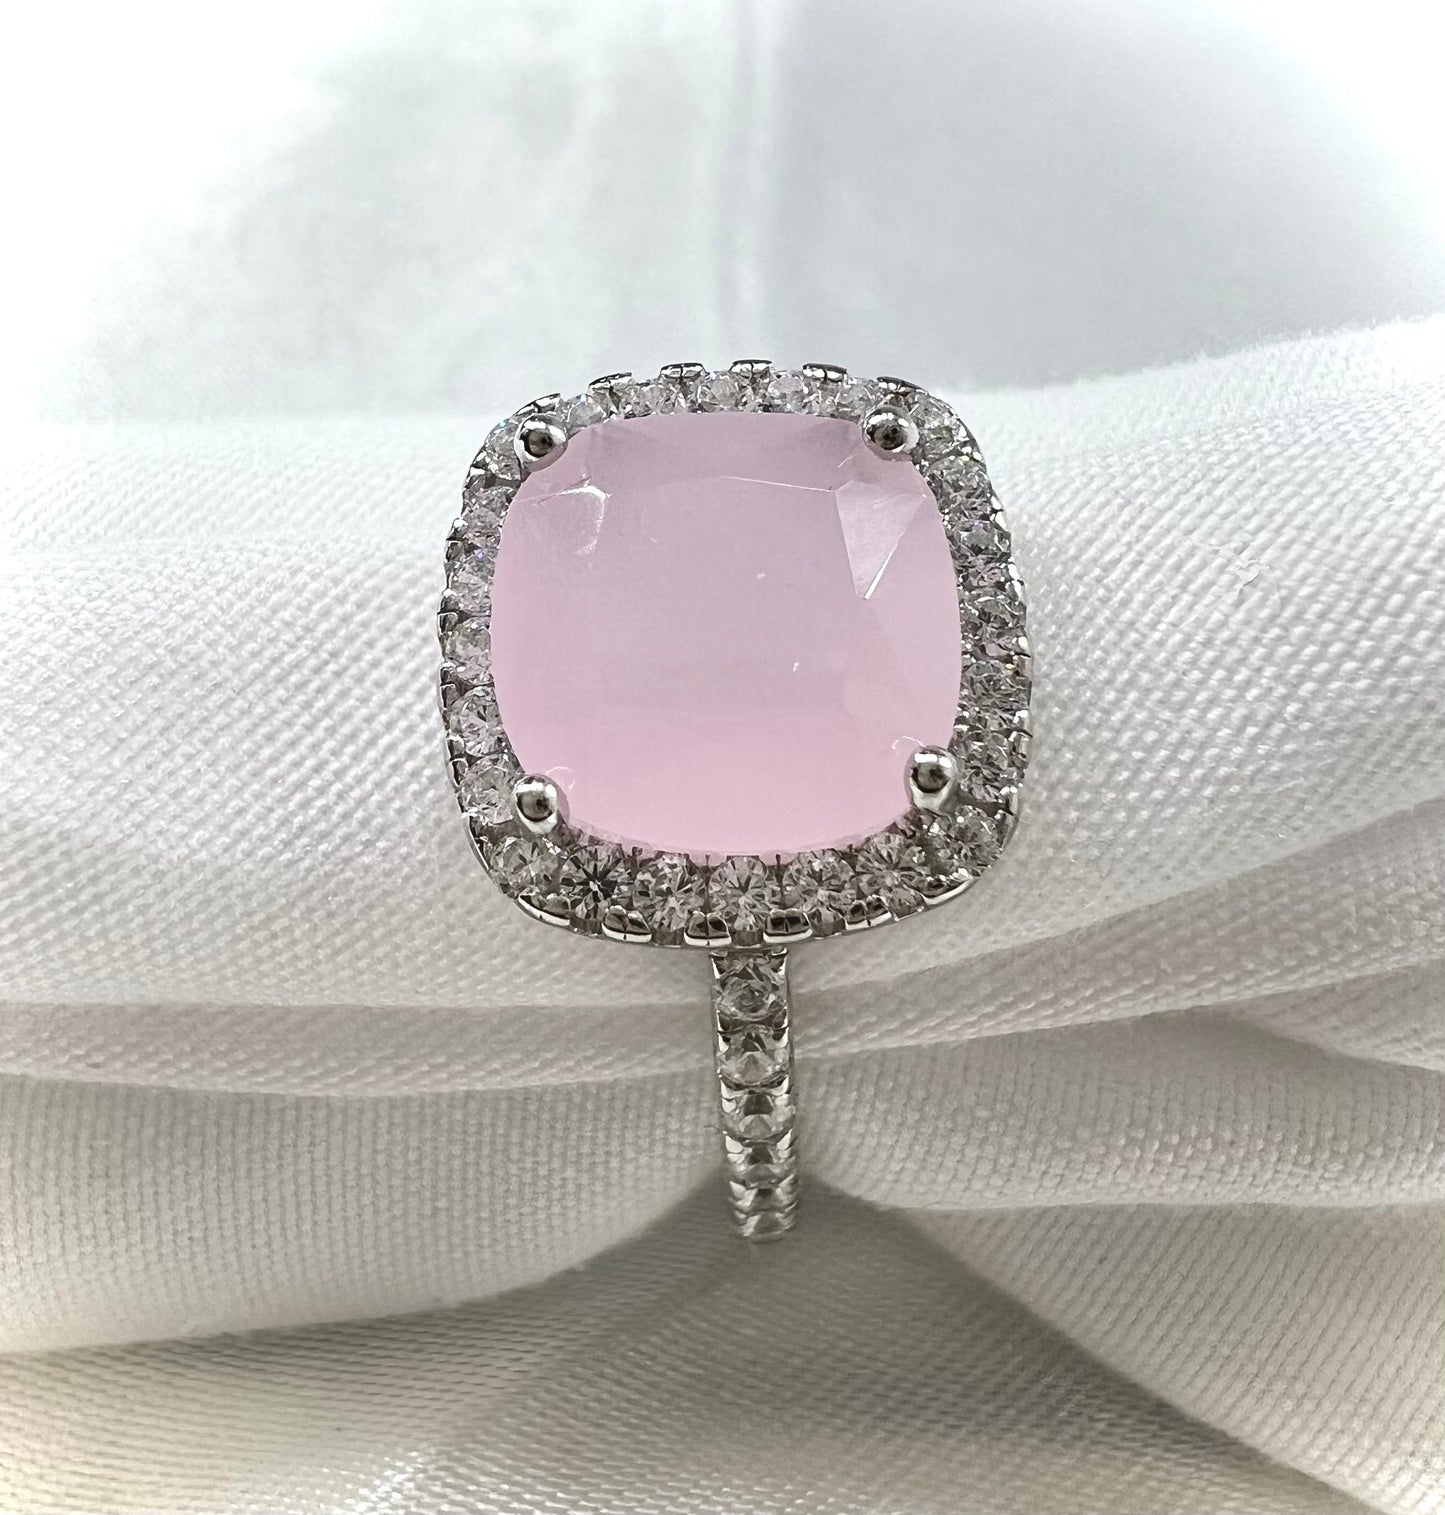 Misty Ice Pink Cubic Zirconia Cushion Cut High Setting Halo Ring in 925 Sterling Silver